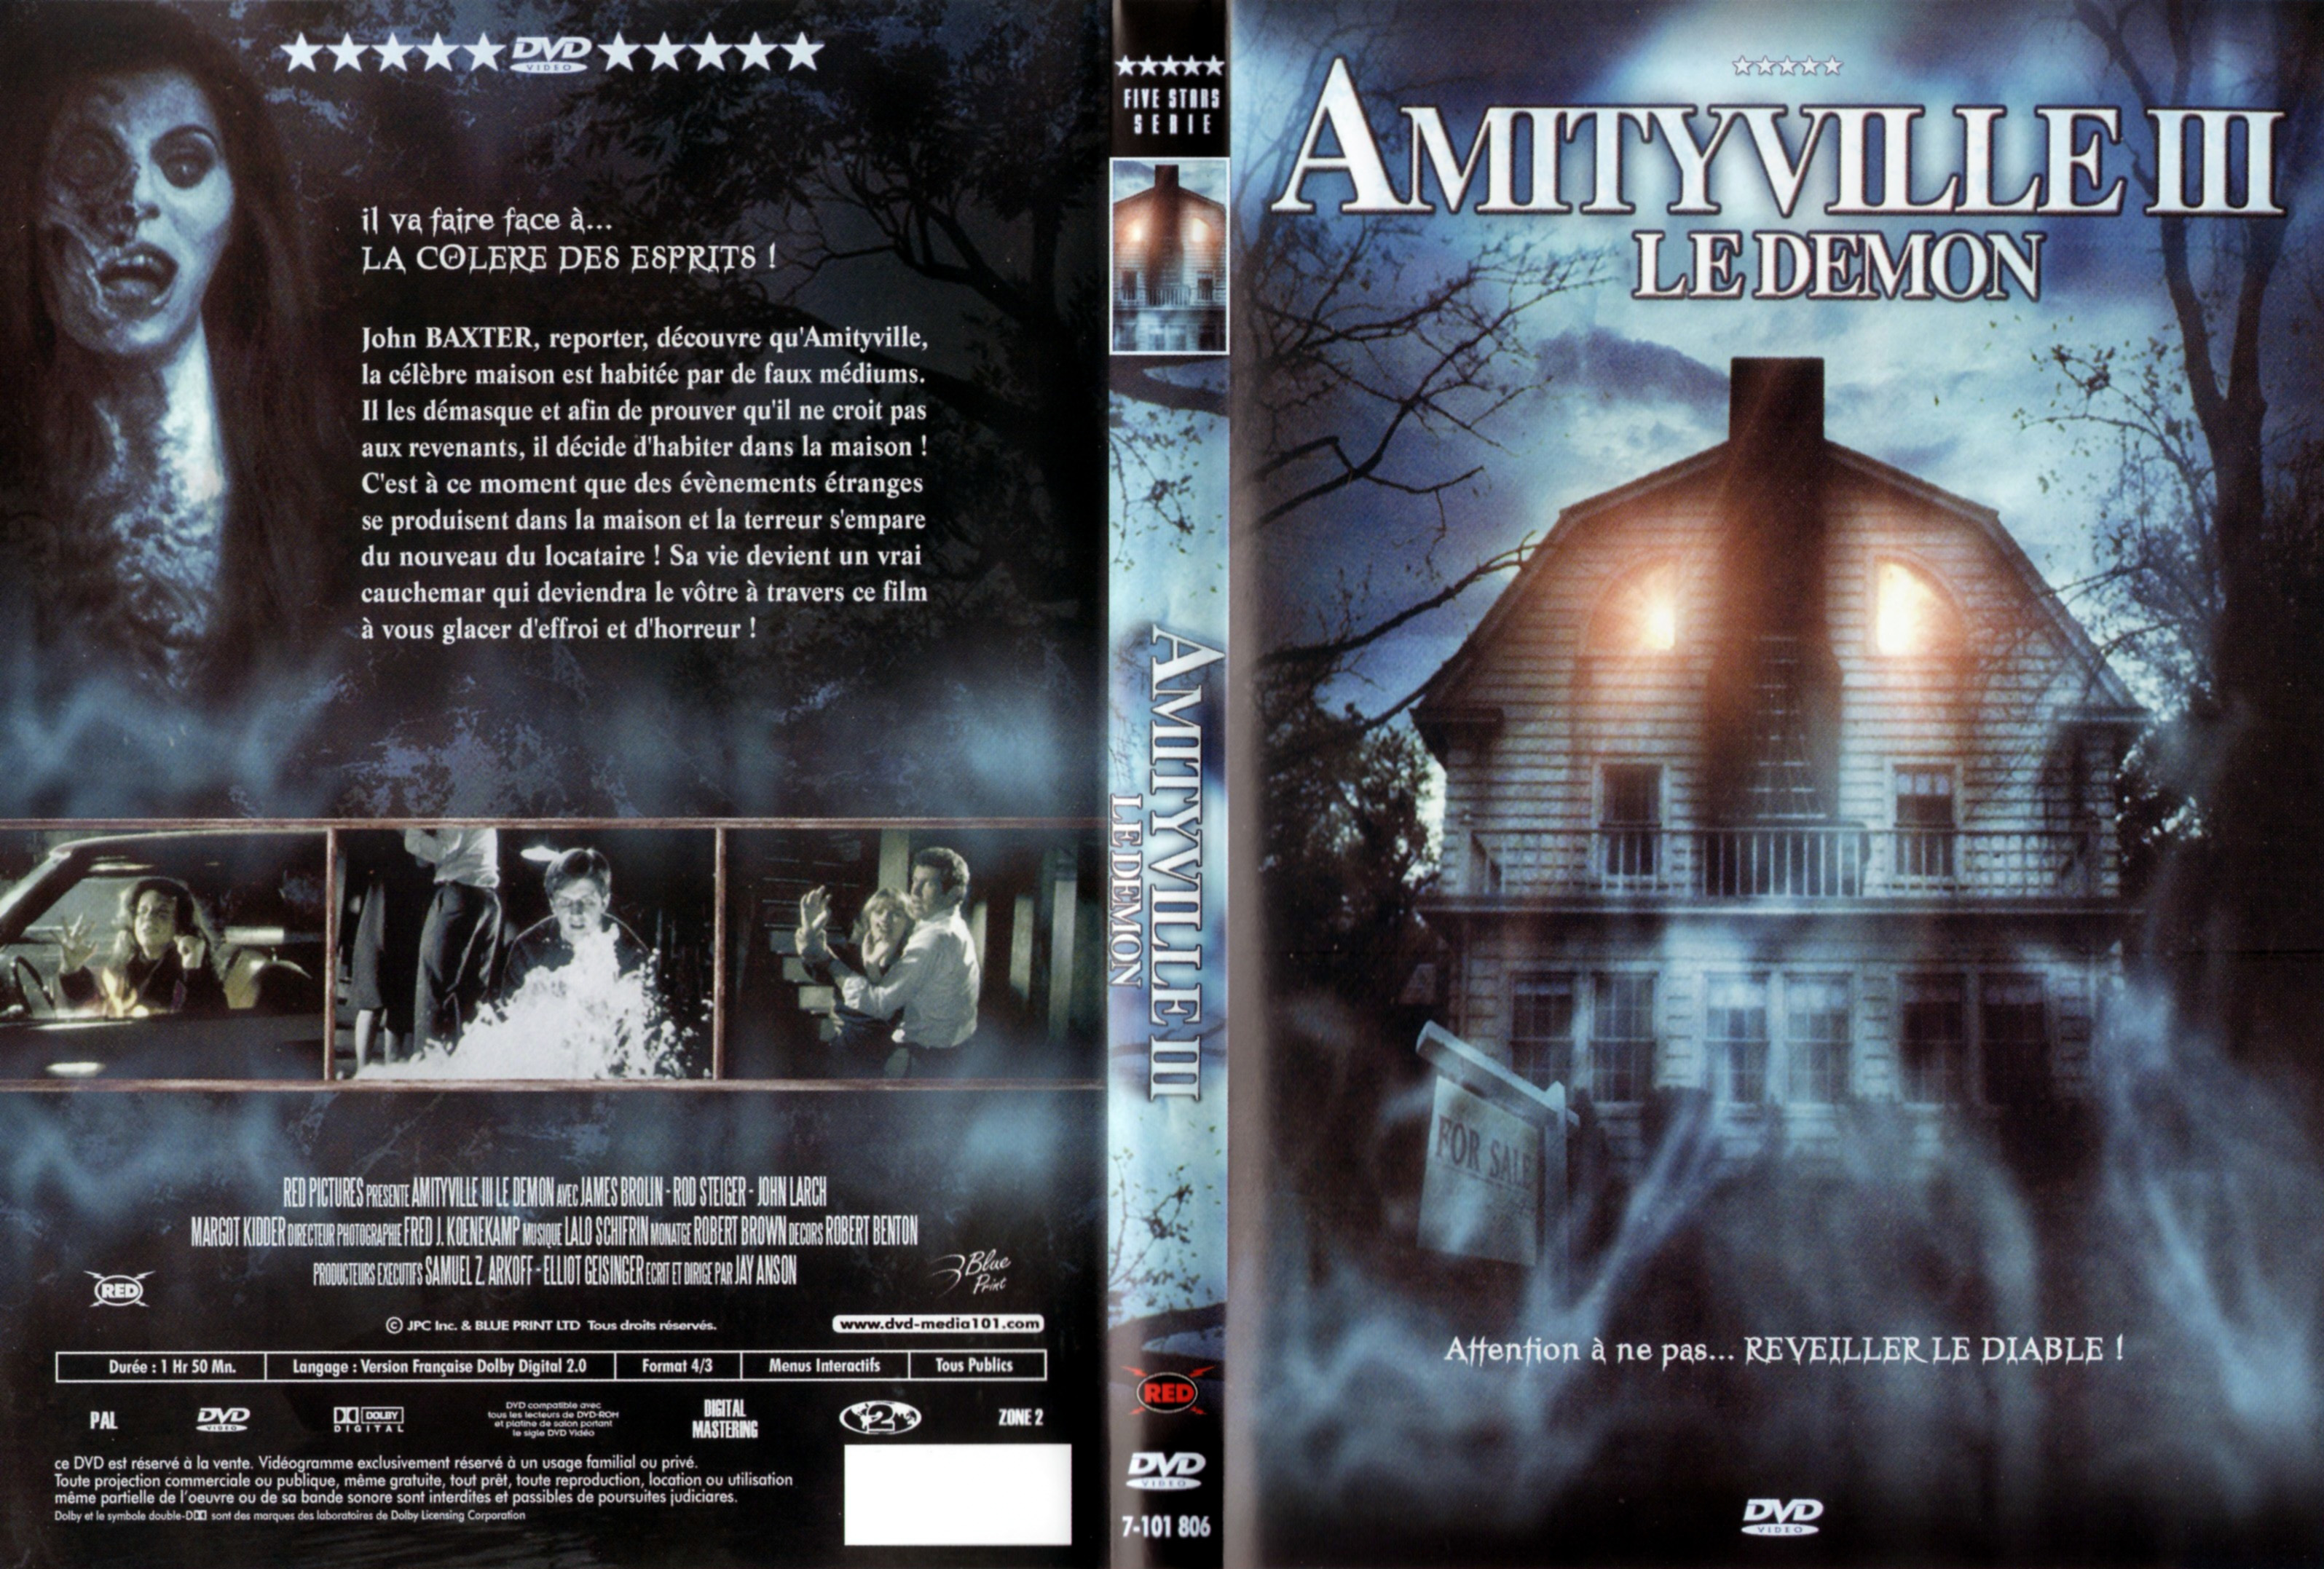 Jaquette DVD Amityville 3 v3